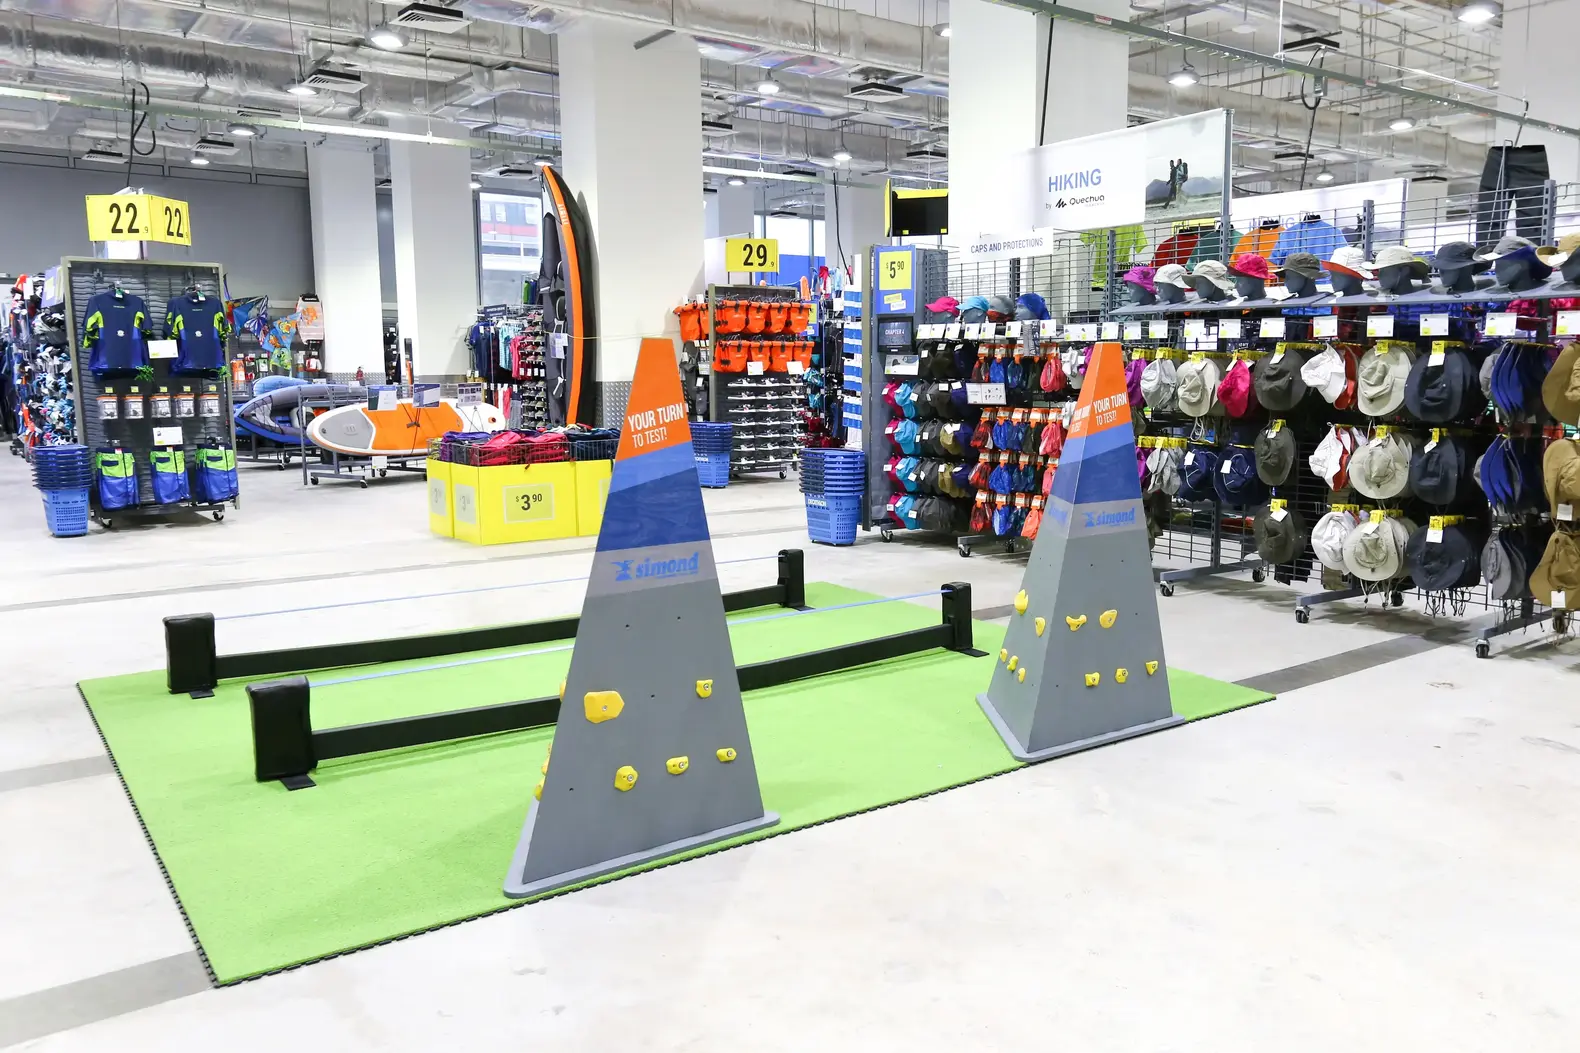 Things to do at FairPrice Hub - Decathlon testing zone